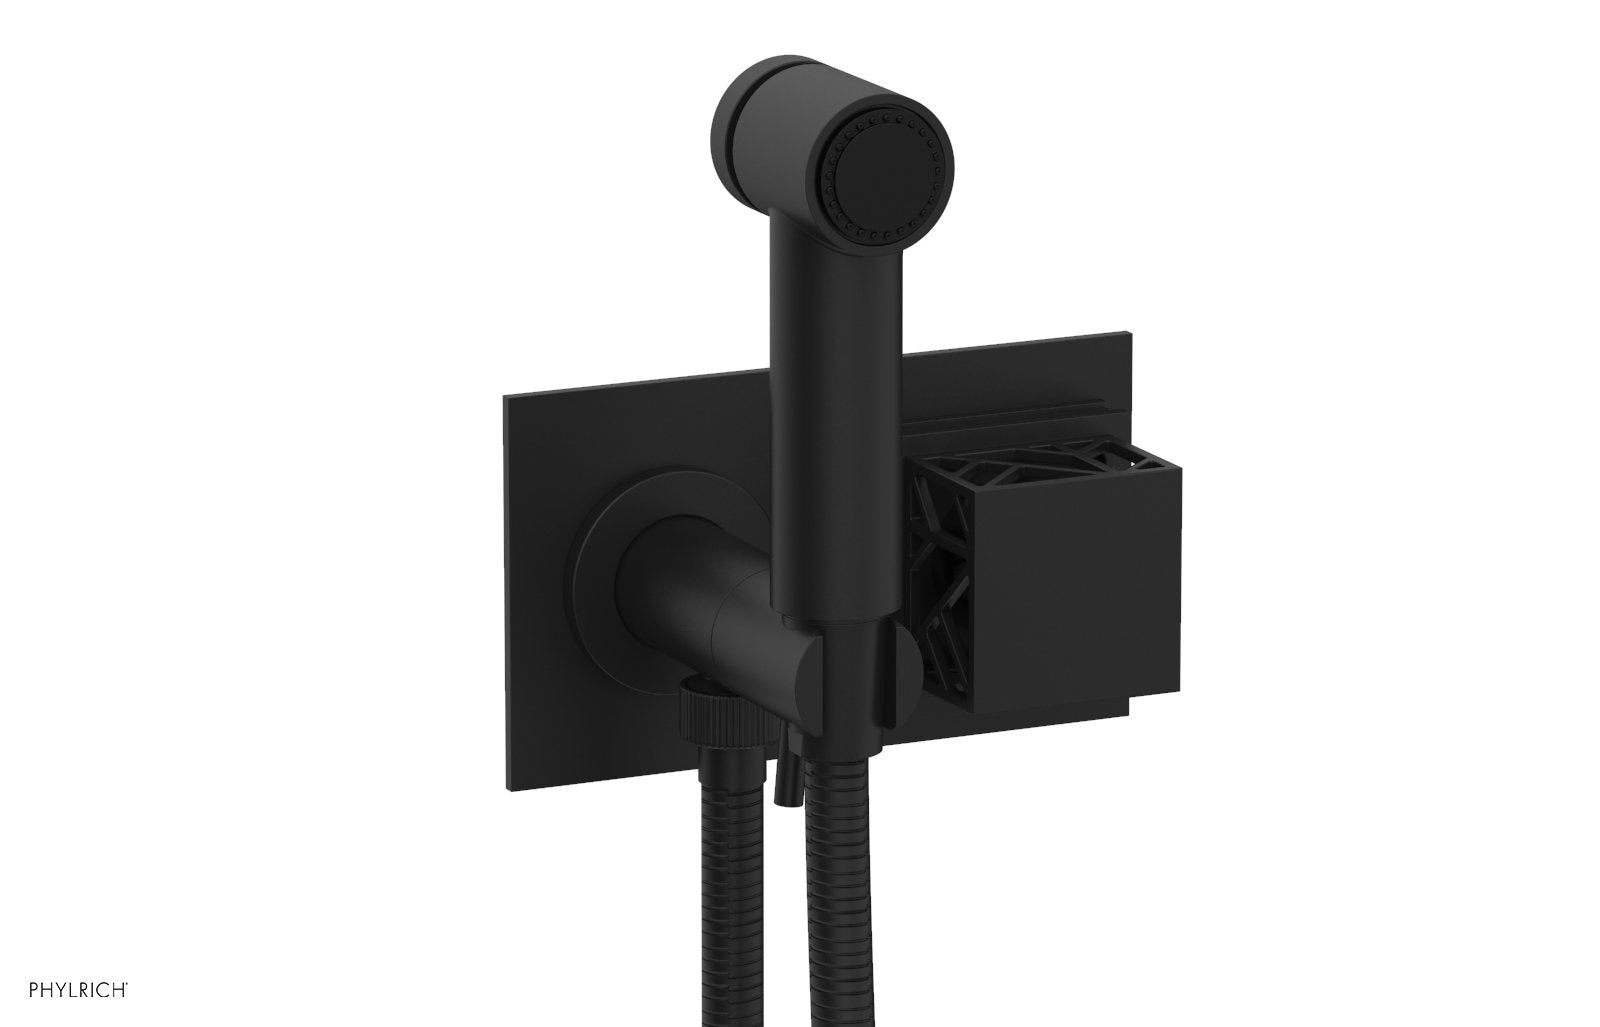 Phylrich JOLIE Wall Mounted Bidet, Square Handle with "Black" Accents